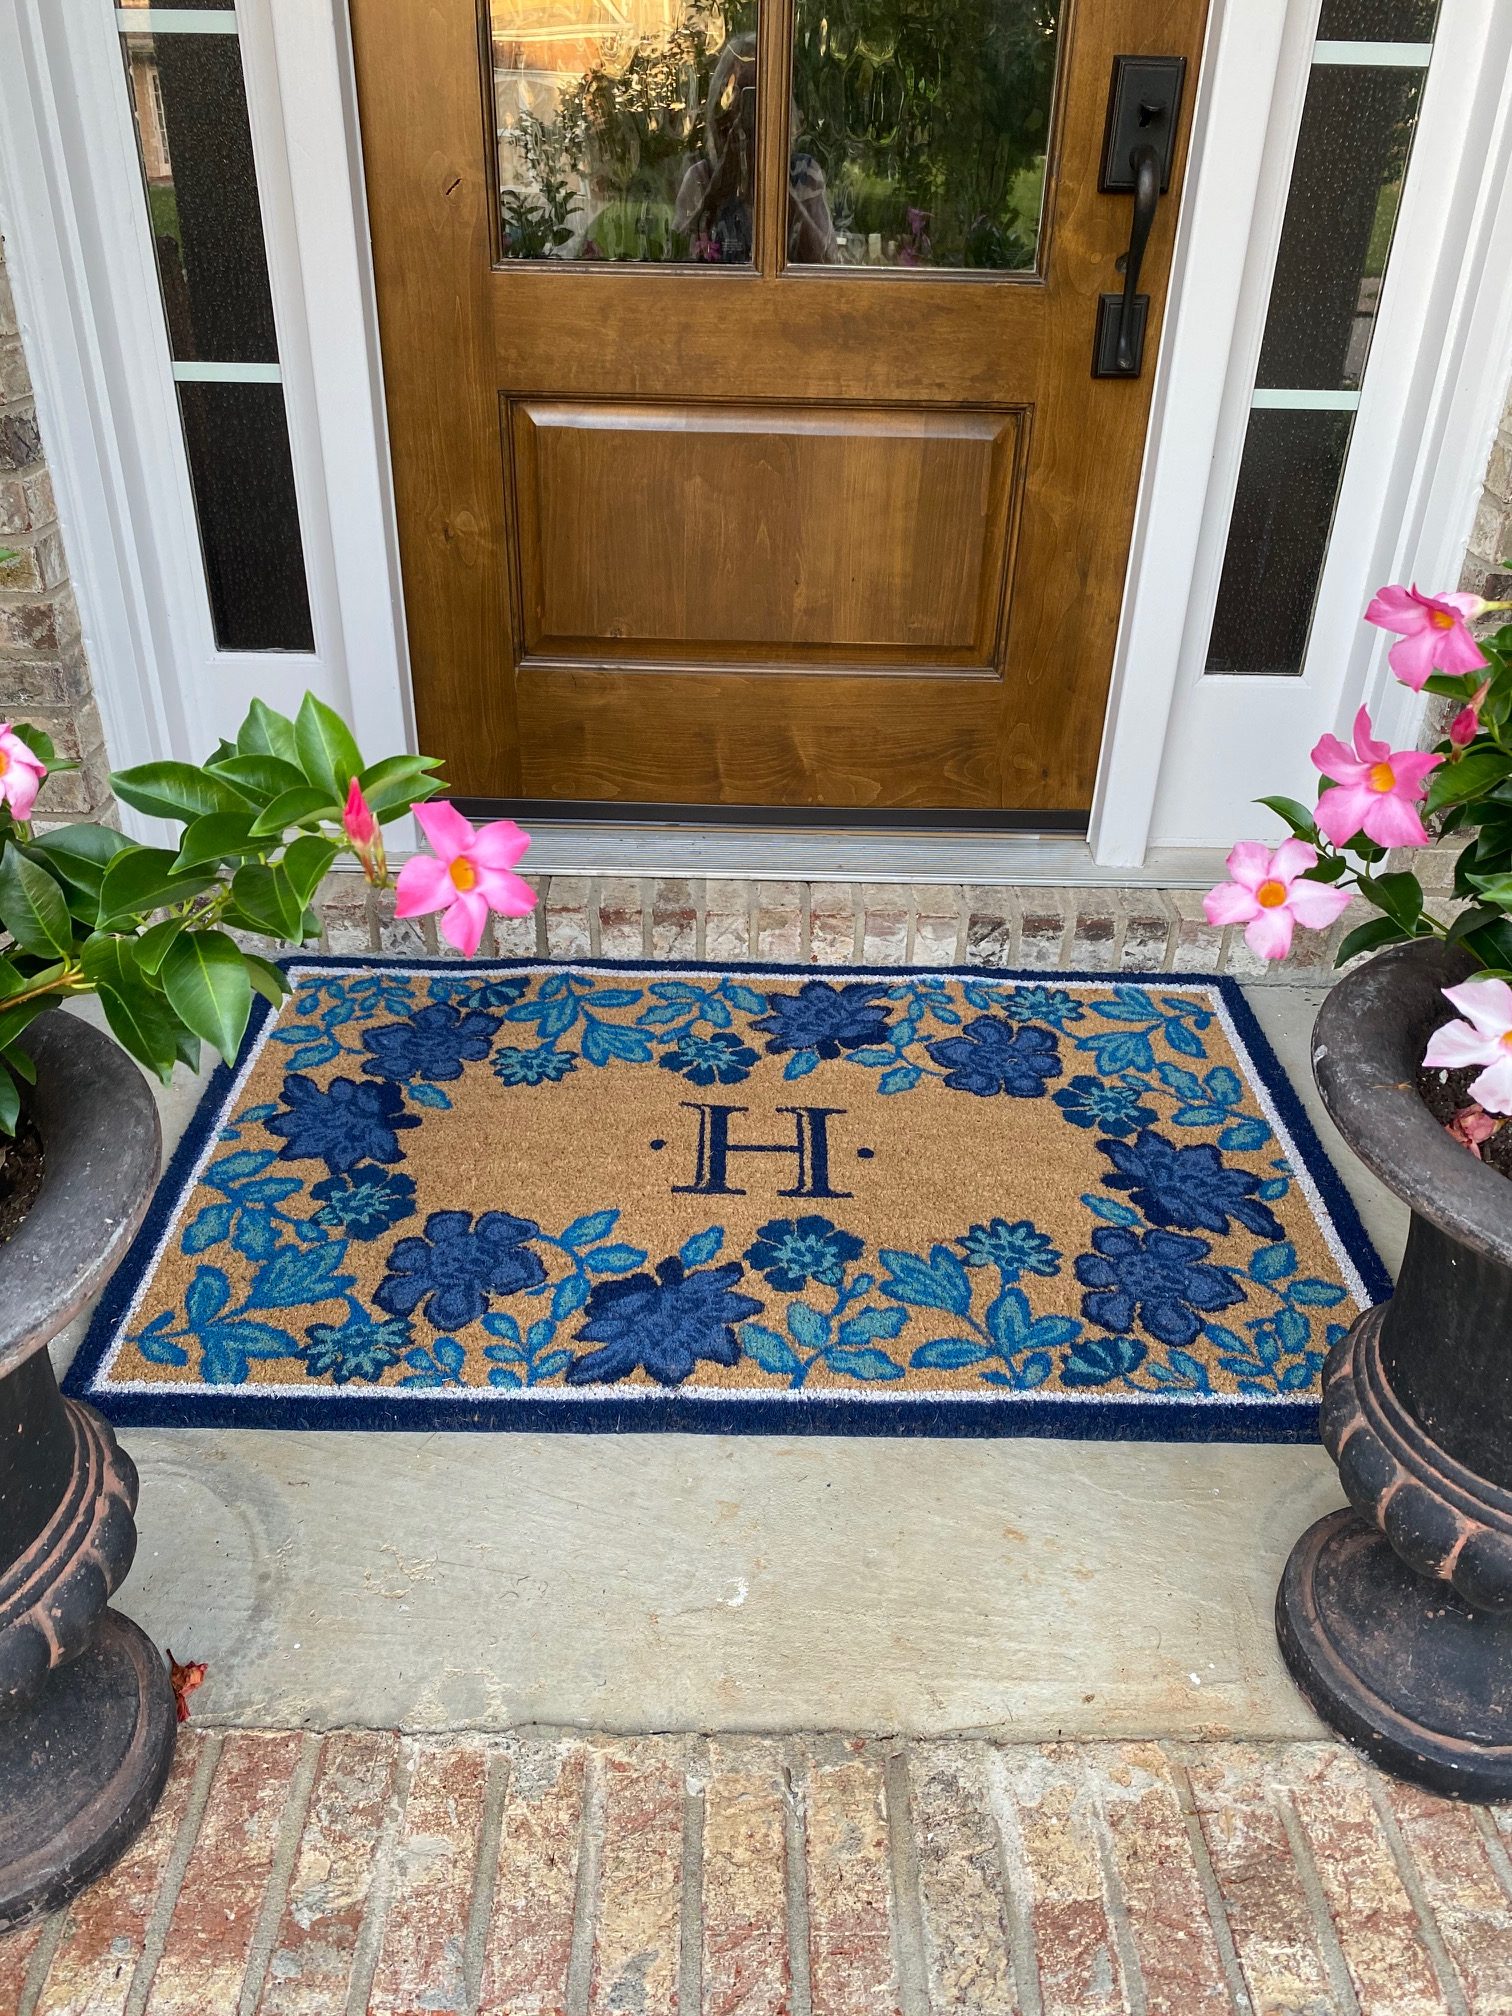 Monogram mat Frontgate rotated